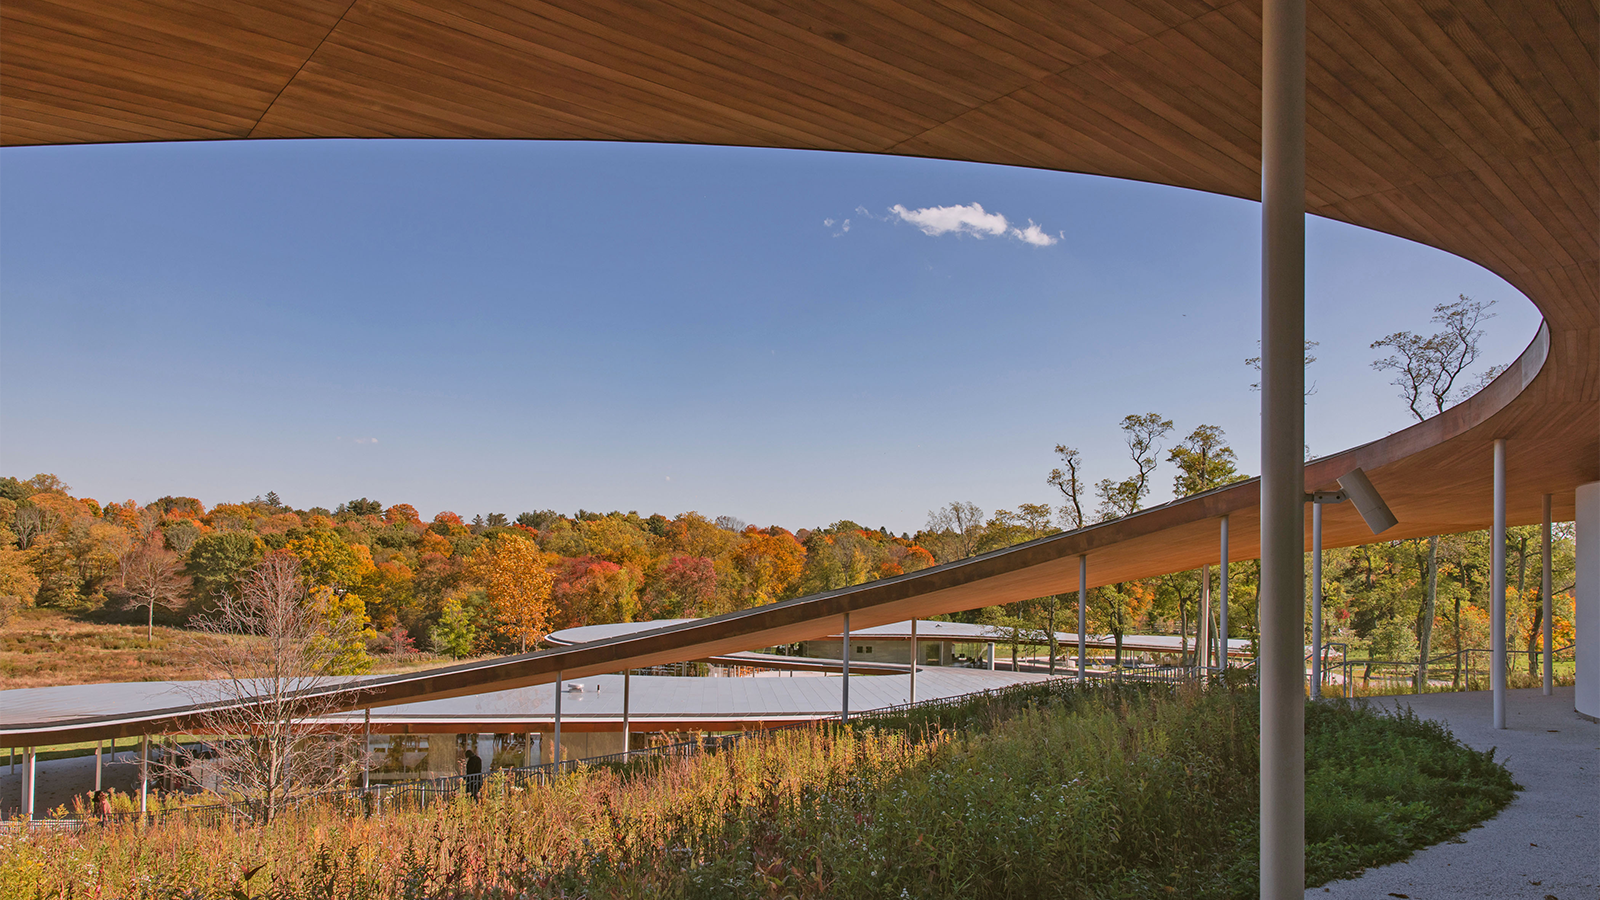 A segment of the River building at Grace Farms surrounded by fall foliage.